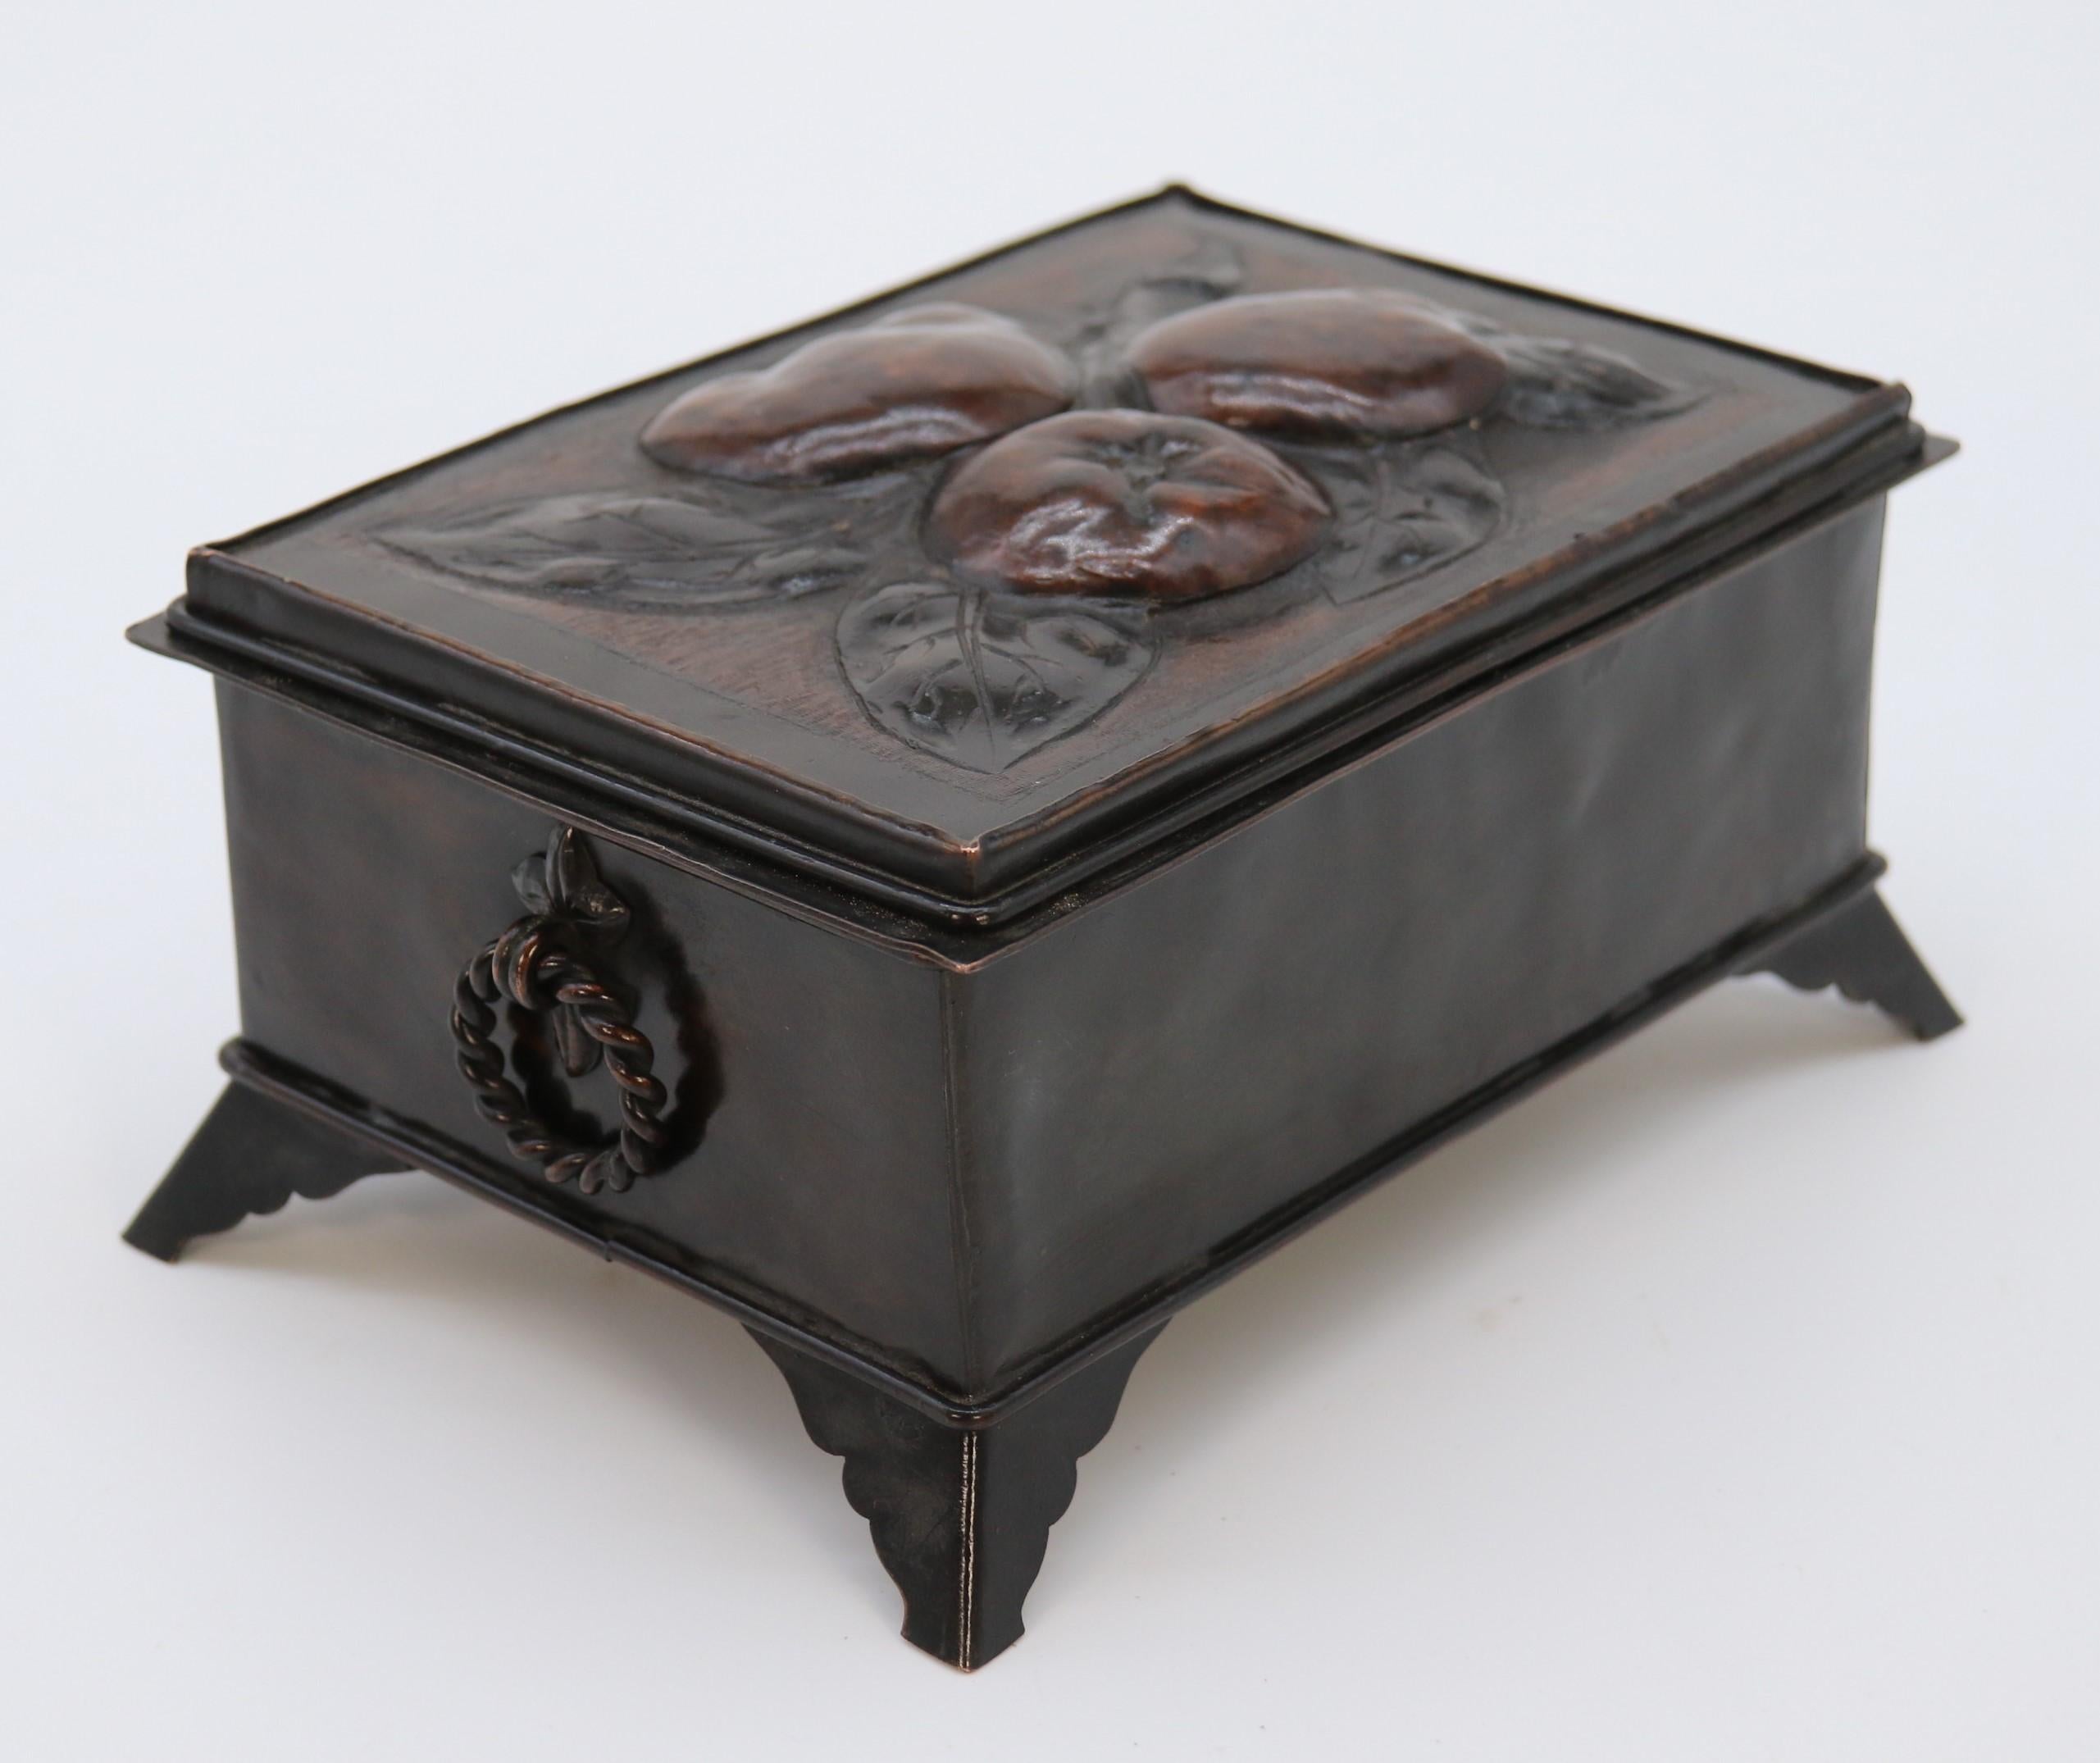 Copper Arts and Crafts William Morris style copper repousse hand decorated box C 1900 For Sale